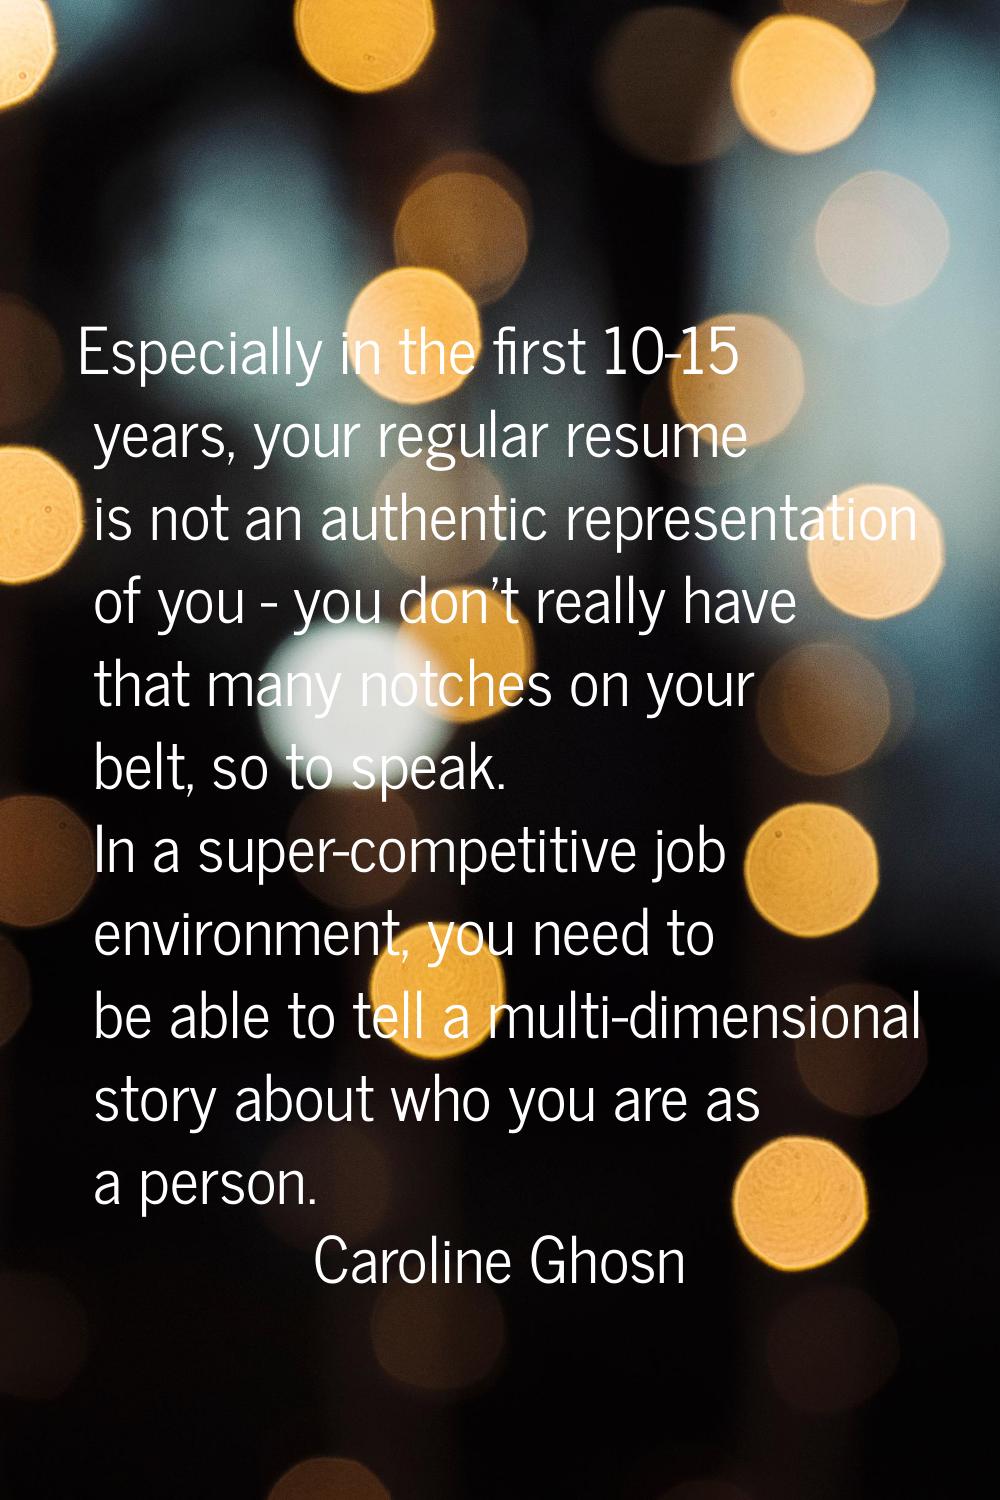 Especially in the first 10-15 years, your regular resume is not an authentic representation of you 